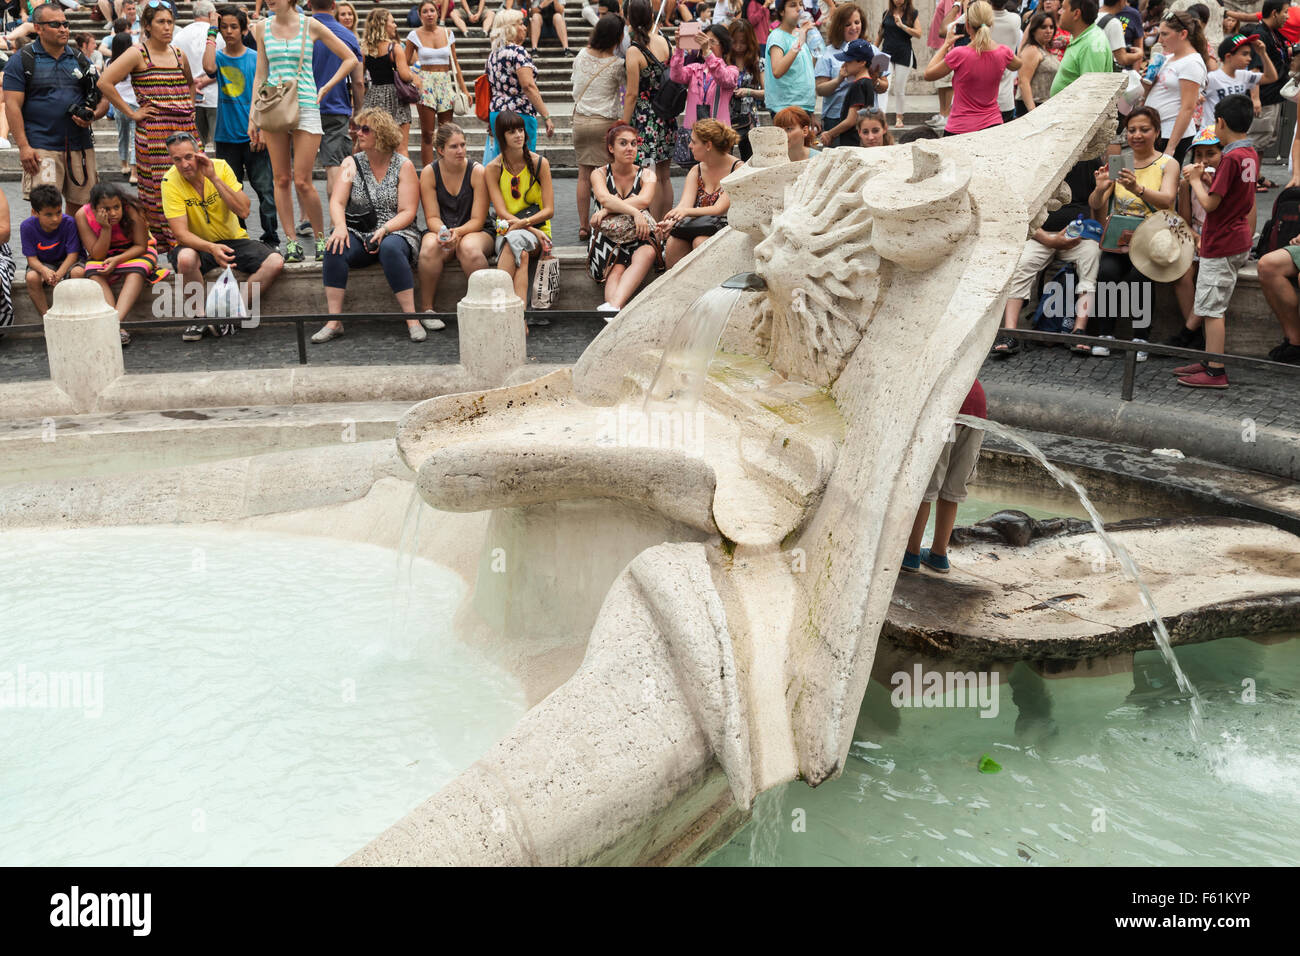 Rome, Italy - August 7, 2015: Crowd of tourists relaxing near Fontana della Barcaccia  on the Piazza di Spagna, summer day Stock Photo